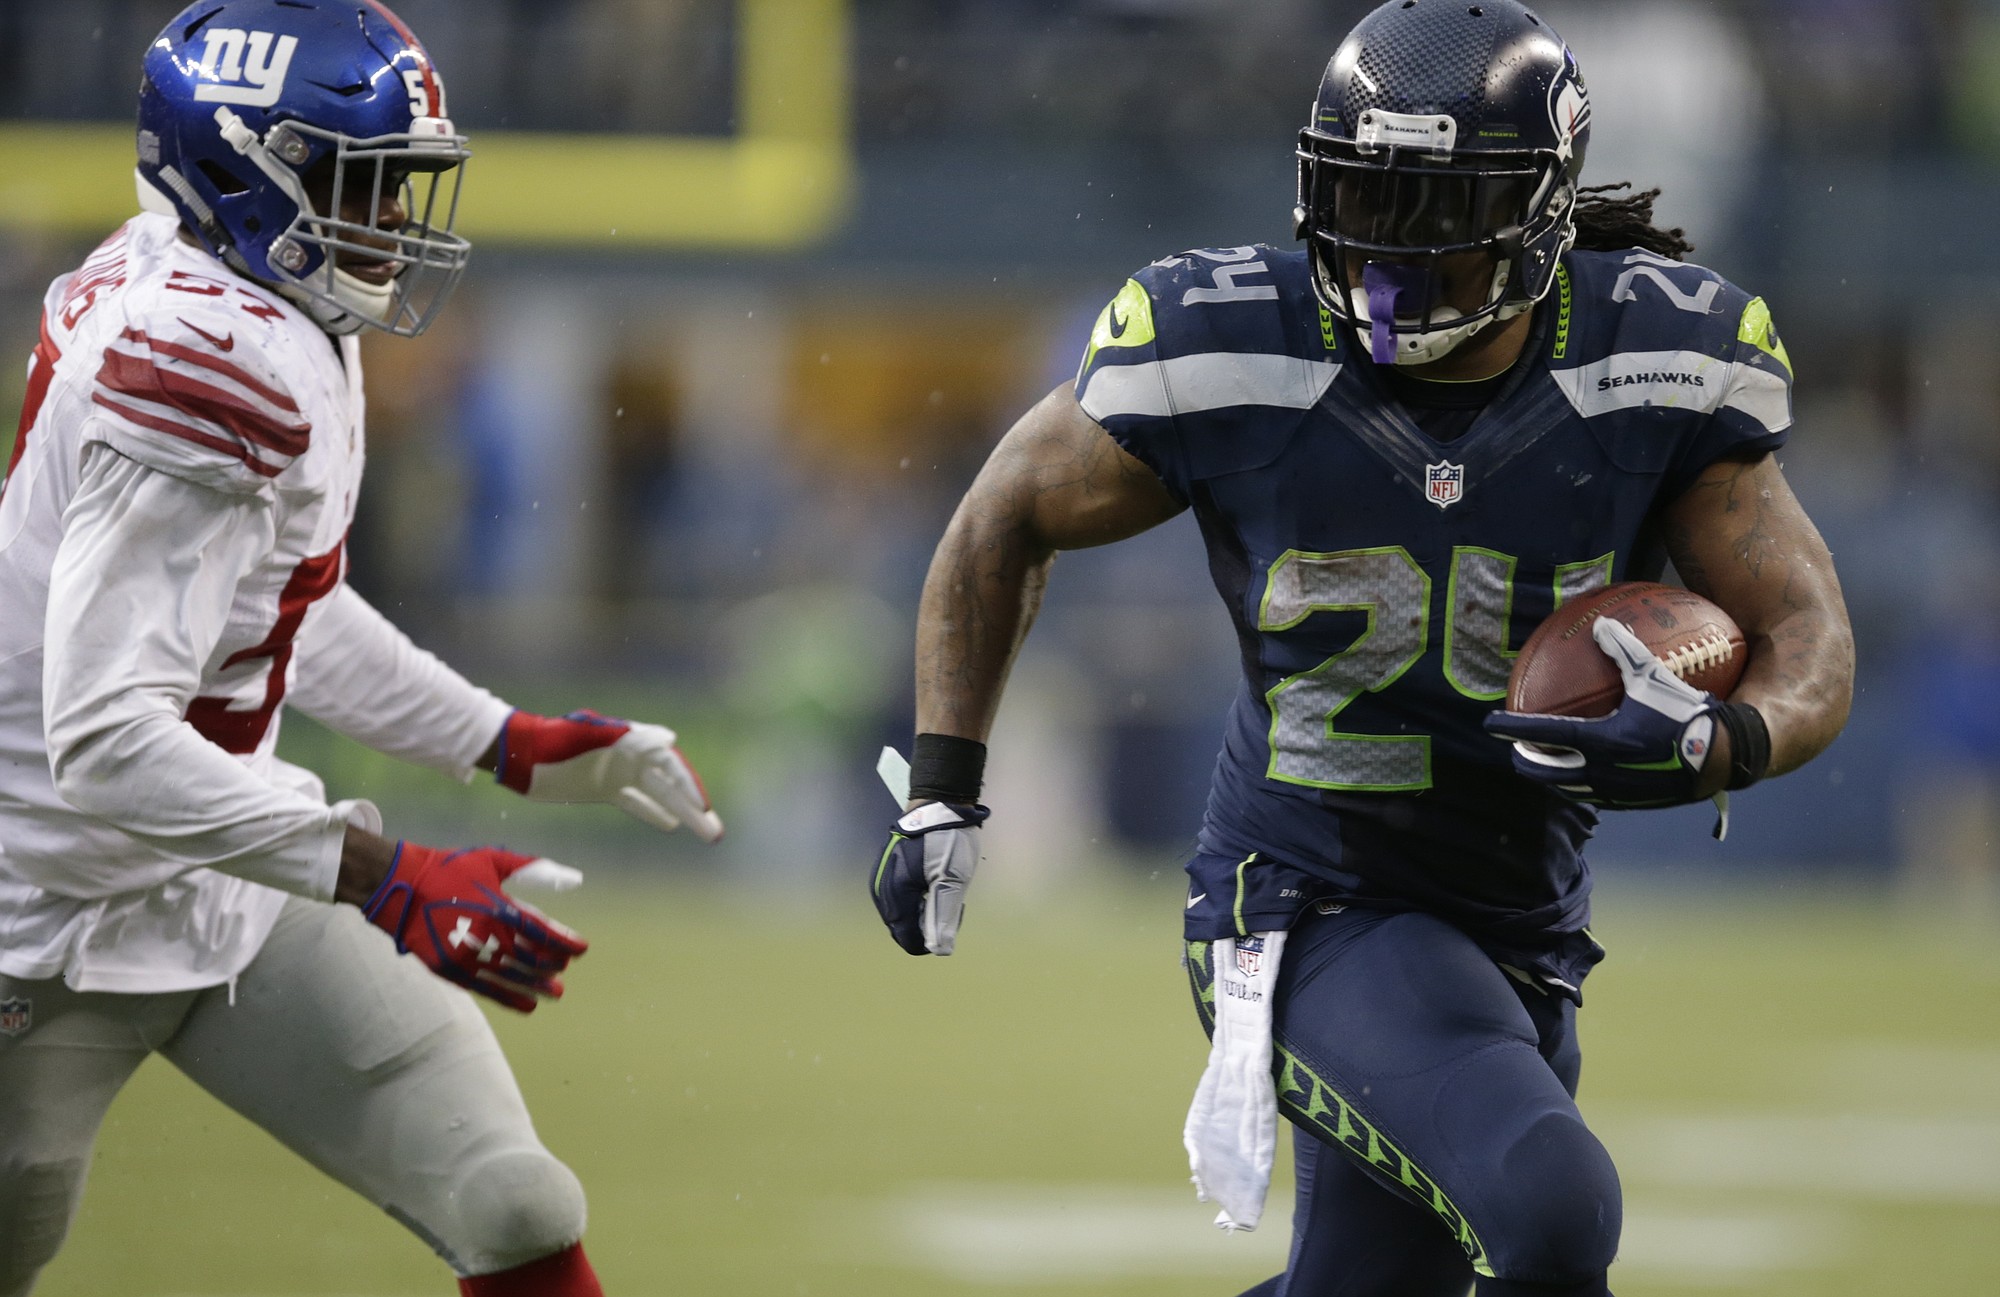 Seattle Seahawks running back Marshawn Lynch runs against the New York Giants in the second half Sunday, Nov. 9, 2014, in Seattle.